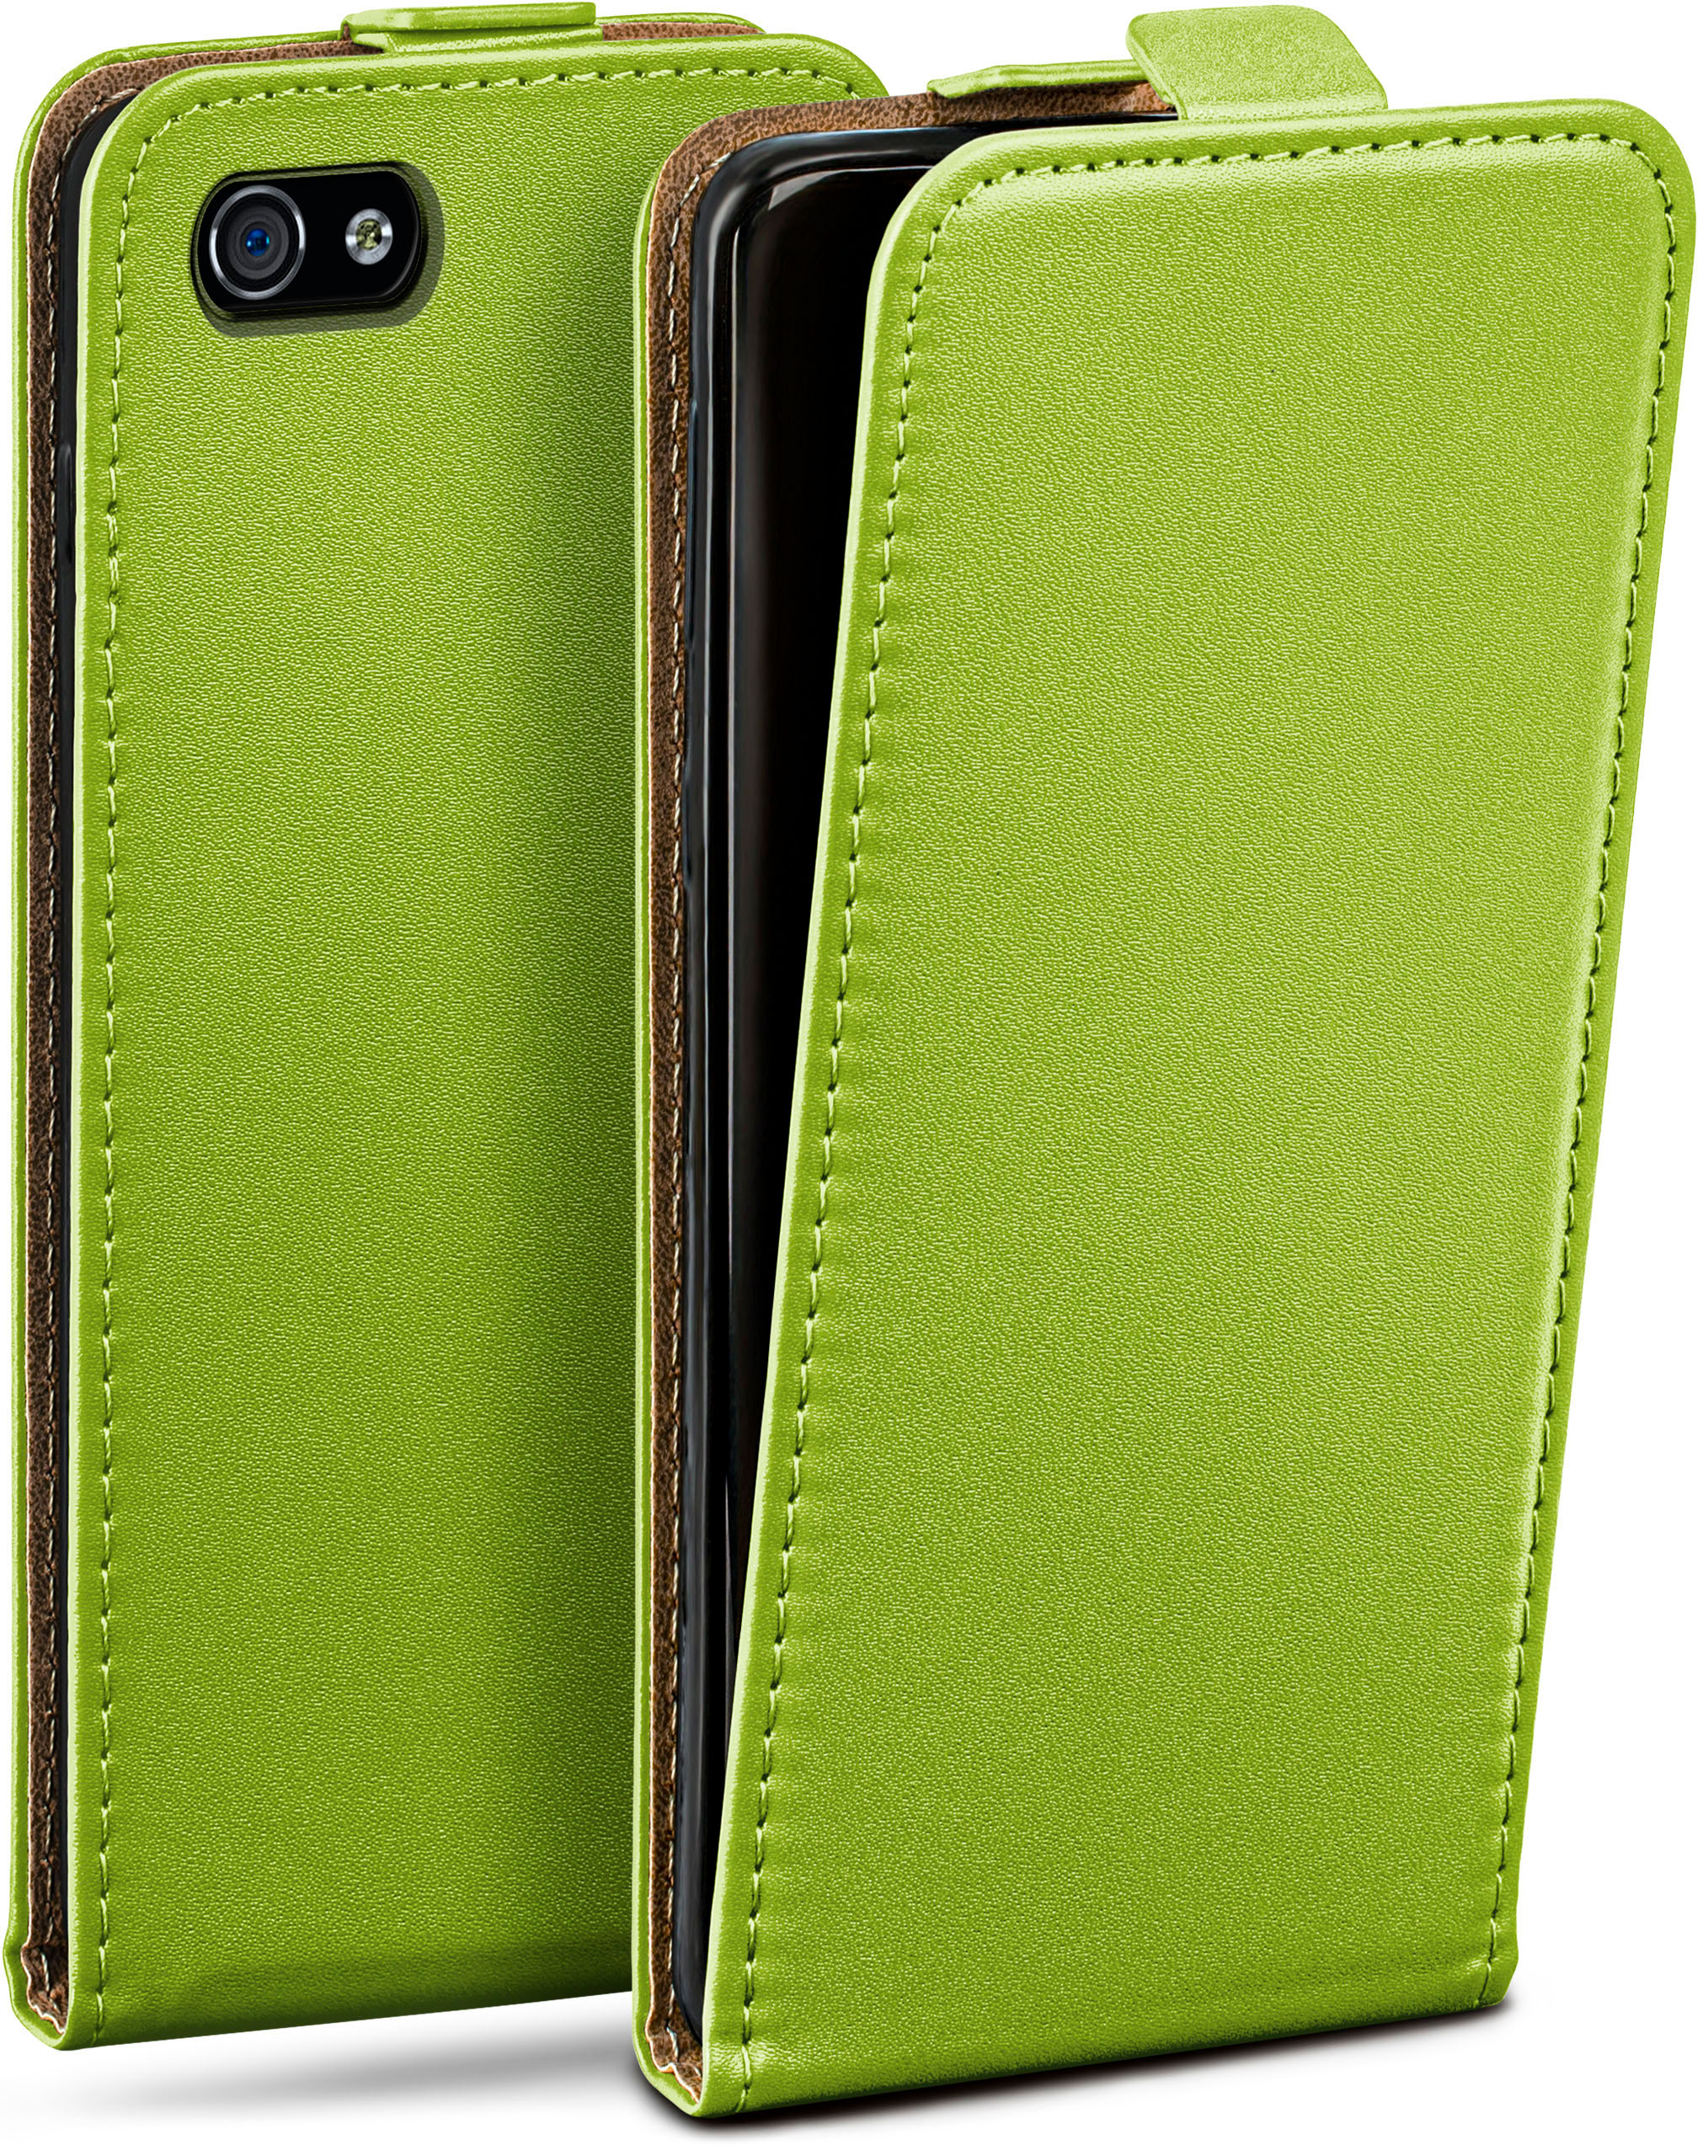 MOEX Flip Case, Flip iPhone 4, Apple, 4s iPhone Lime-Green Cover, 